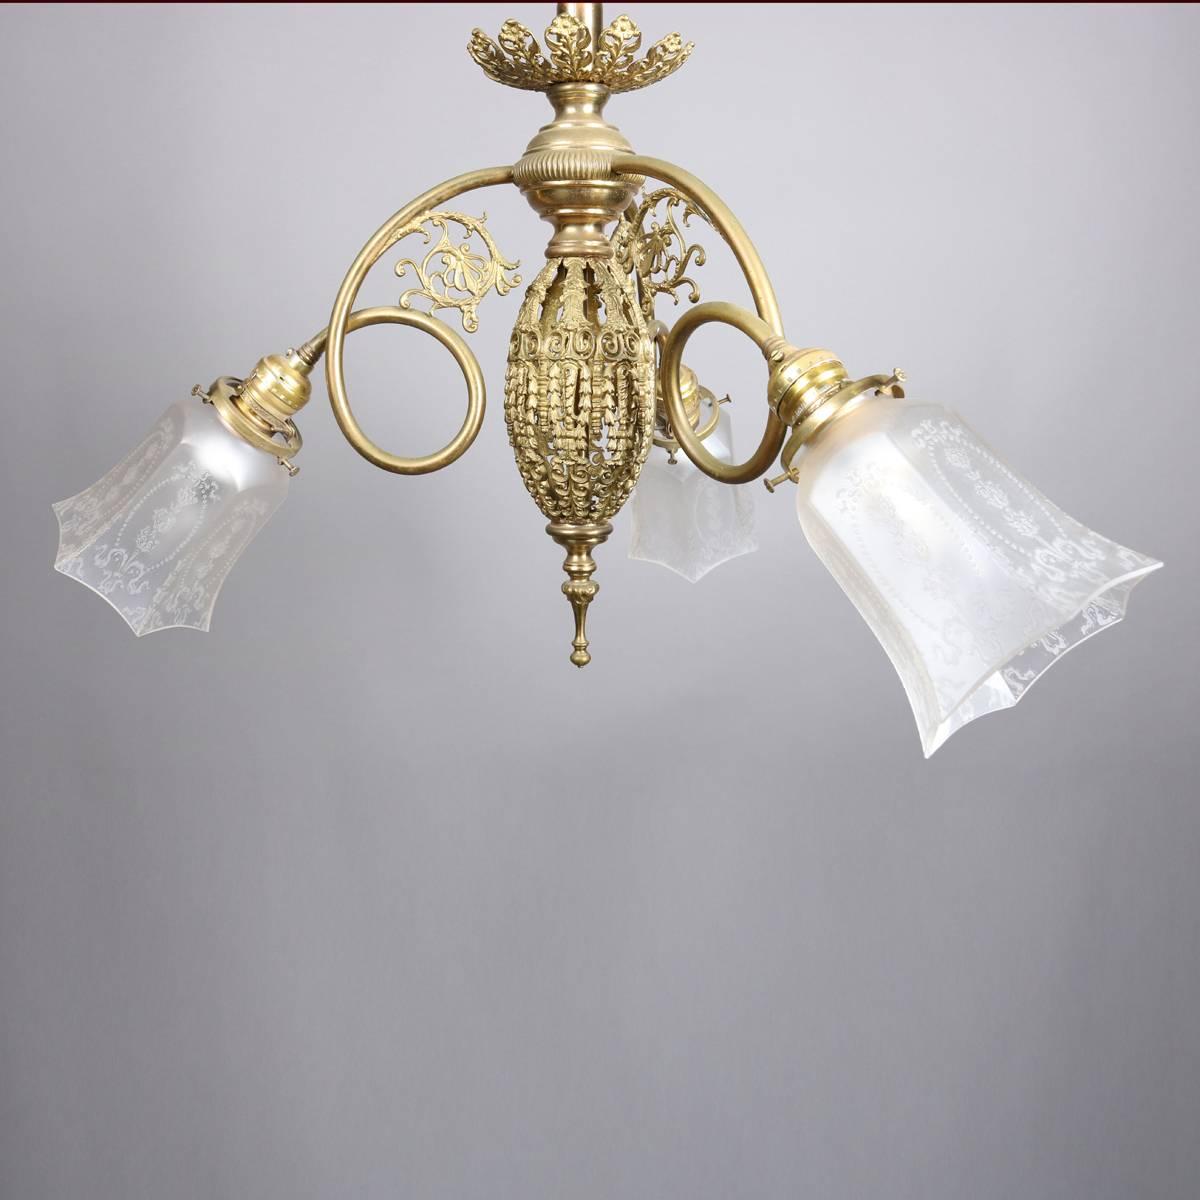 Three-arm brass chandelier features pierced egg form body with scroll and foliate form arms terminating in lights with faceted floral etched frosted shades, newly re-wired, 20th century

Measures - 60" drop, 24".